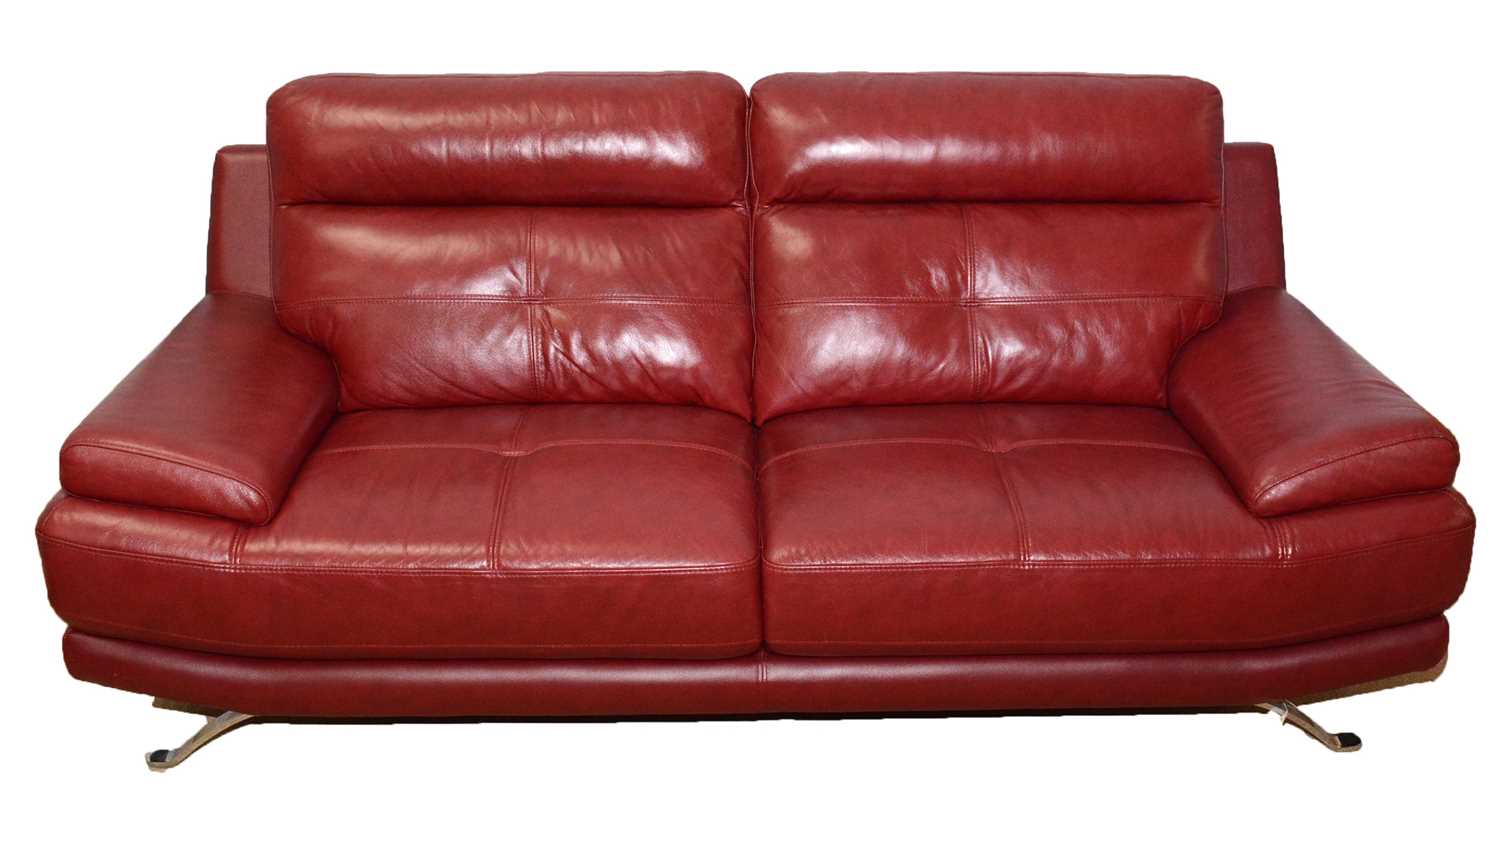 Lot 80 - A retro style sofa upholstered in red leatherette